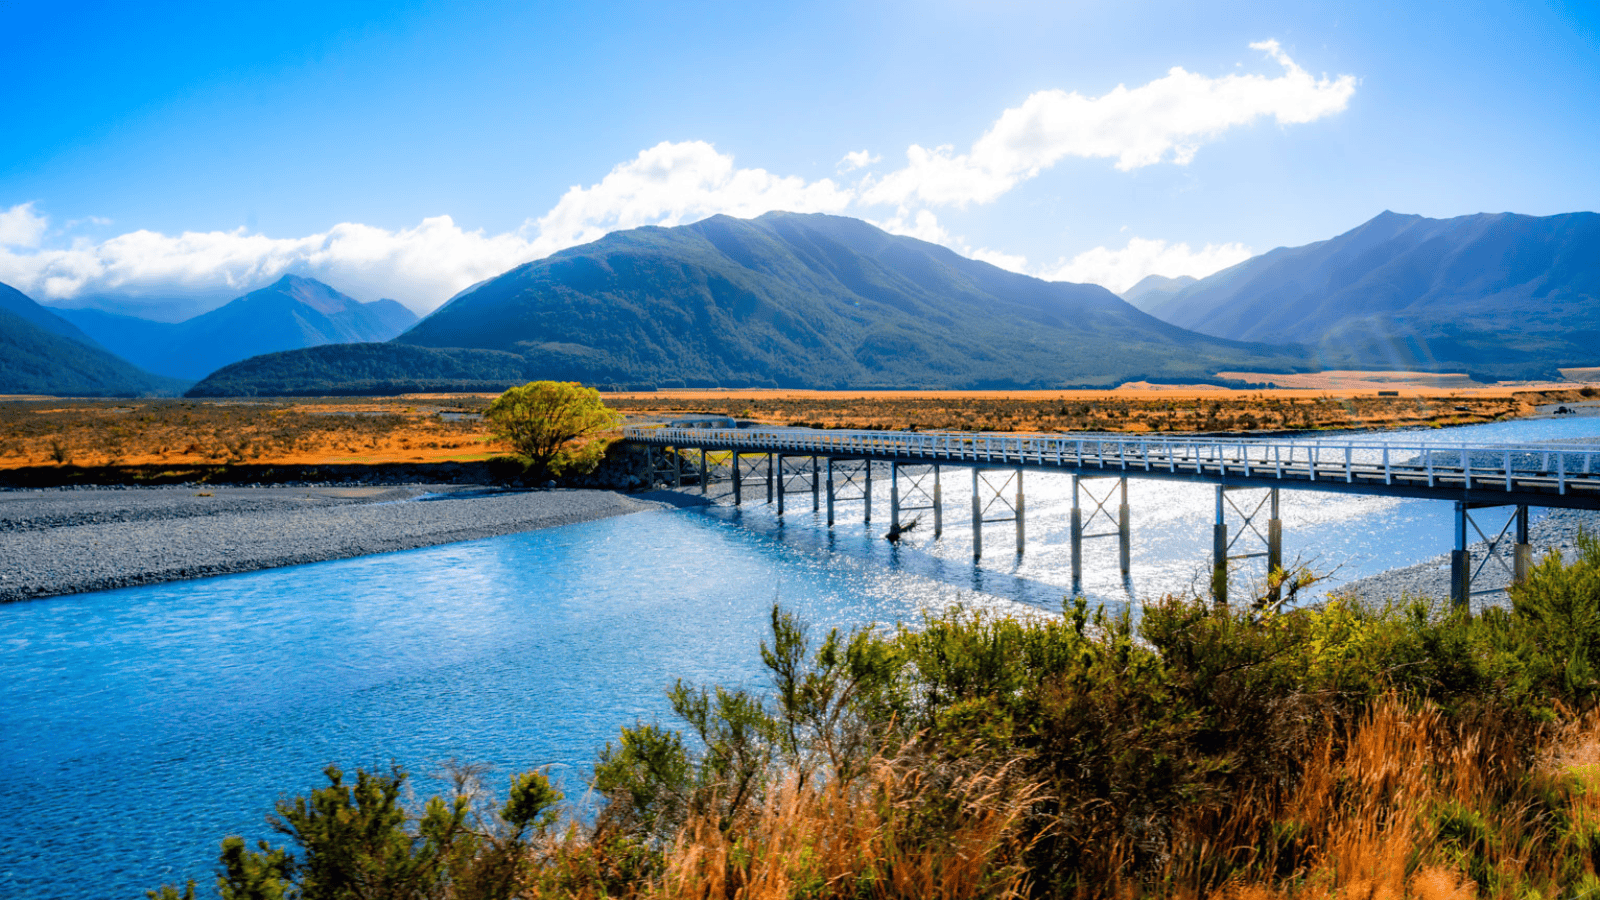 <p>Prepare for a legendary ride aboard the <a href="https://www.greatjourneysnz.com/scenic-trains/tranzalpine-train/" rel="nofollow external noopener noreferrer">TranzAlpine Train</a>. This New Zealand railway travels coast-to-coast between Christchurch and Greymouth, offering a beautiful opportunity to see the mountains and coastlines of the South Island. </p><p>The TranzAlpine Train is a one-day ride featuring some of New Zealand’s most impressive scenery. Passengers will see valleys, rivers, plains, and gorges along the Great Divide route. Enhance your rail tour by sampling regional cuisine and snapping pictures from the train’s open-air car.</p>